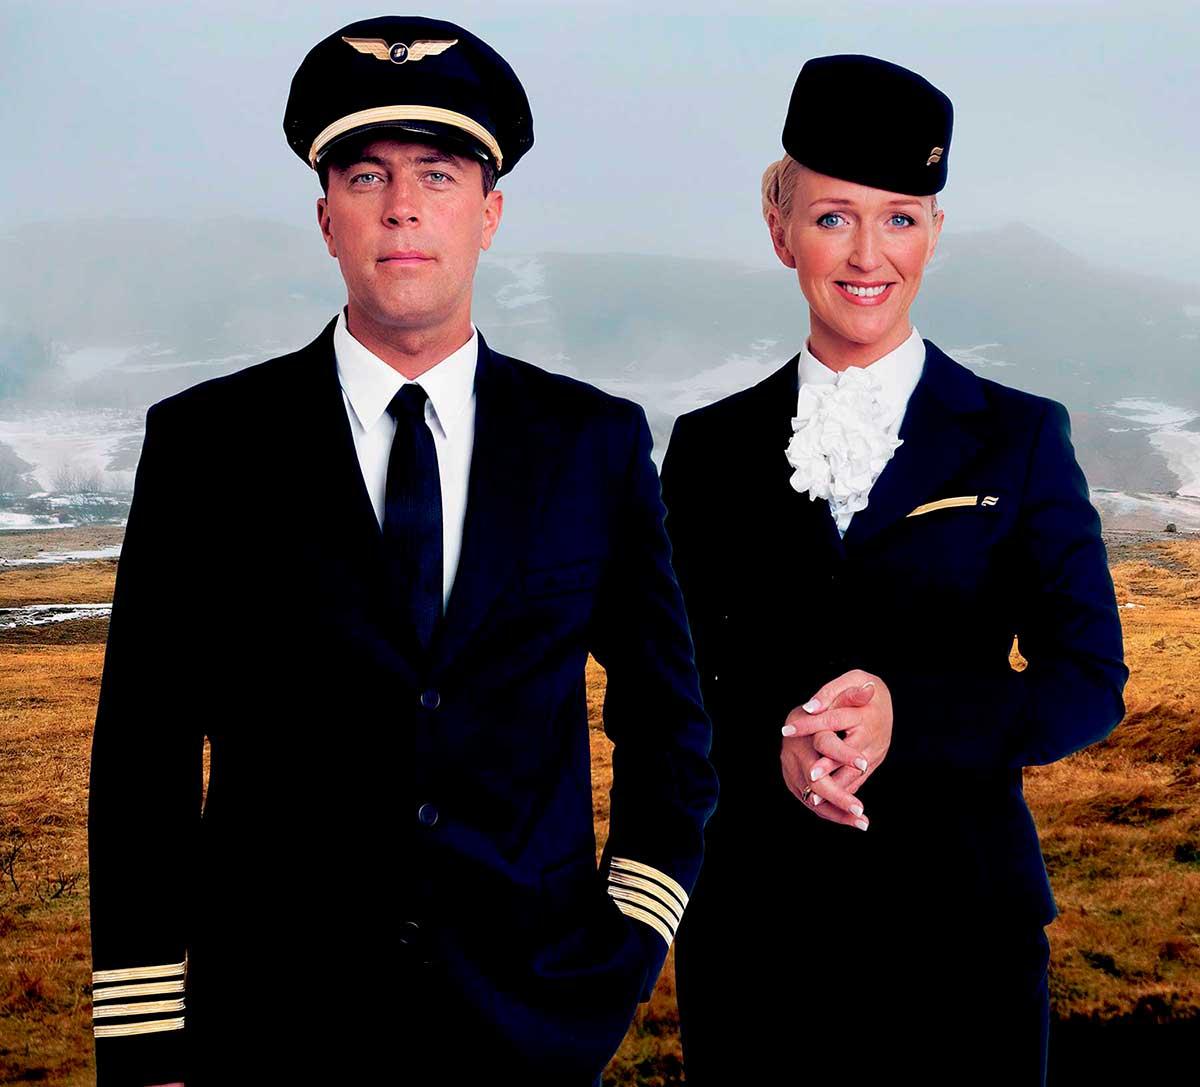 Customized uniforms for Icelandair made by Olino